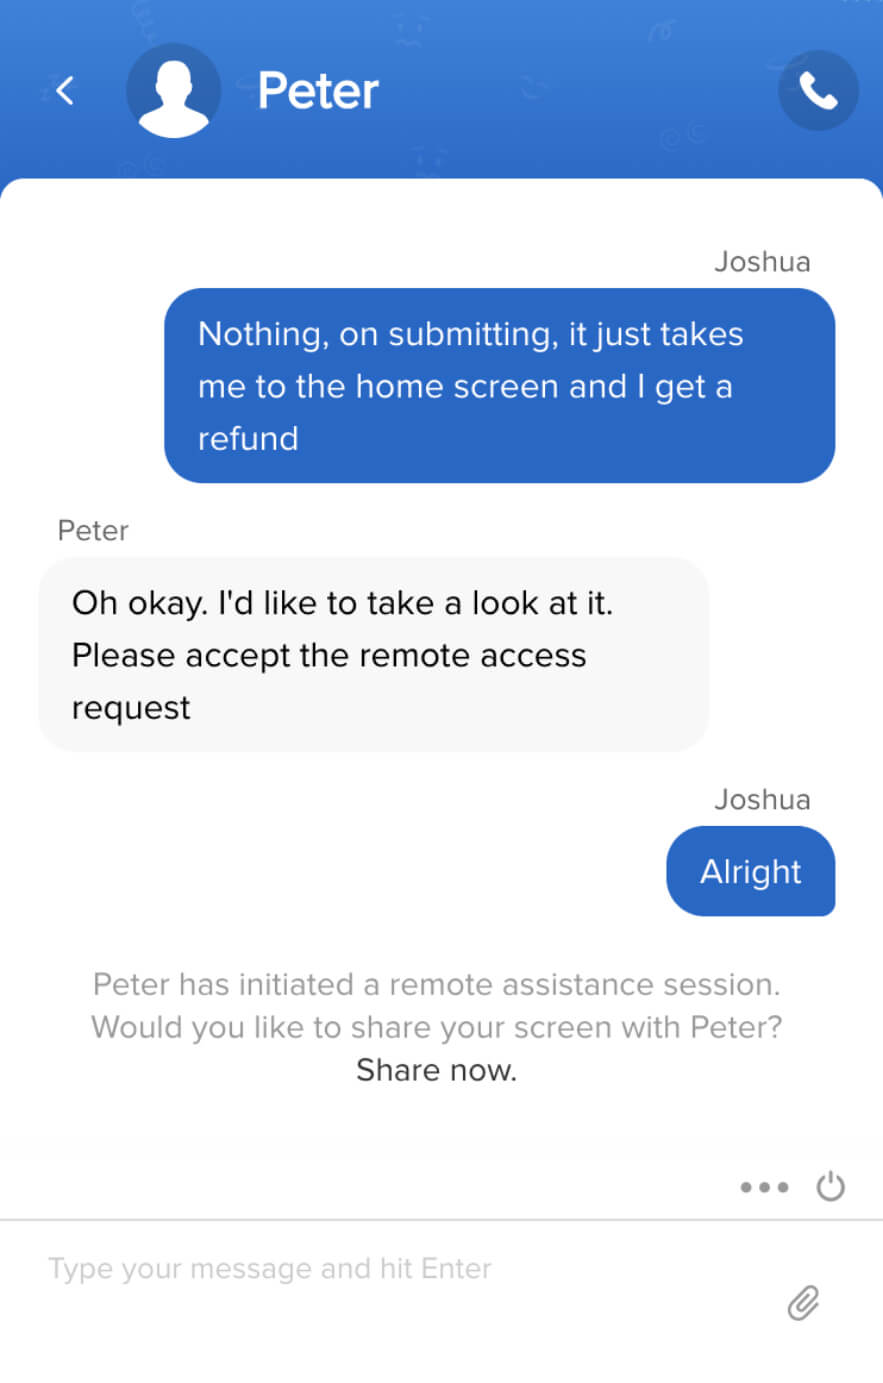 Screen sharing and remote access